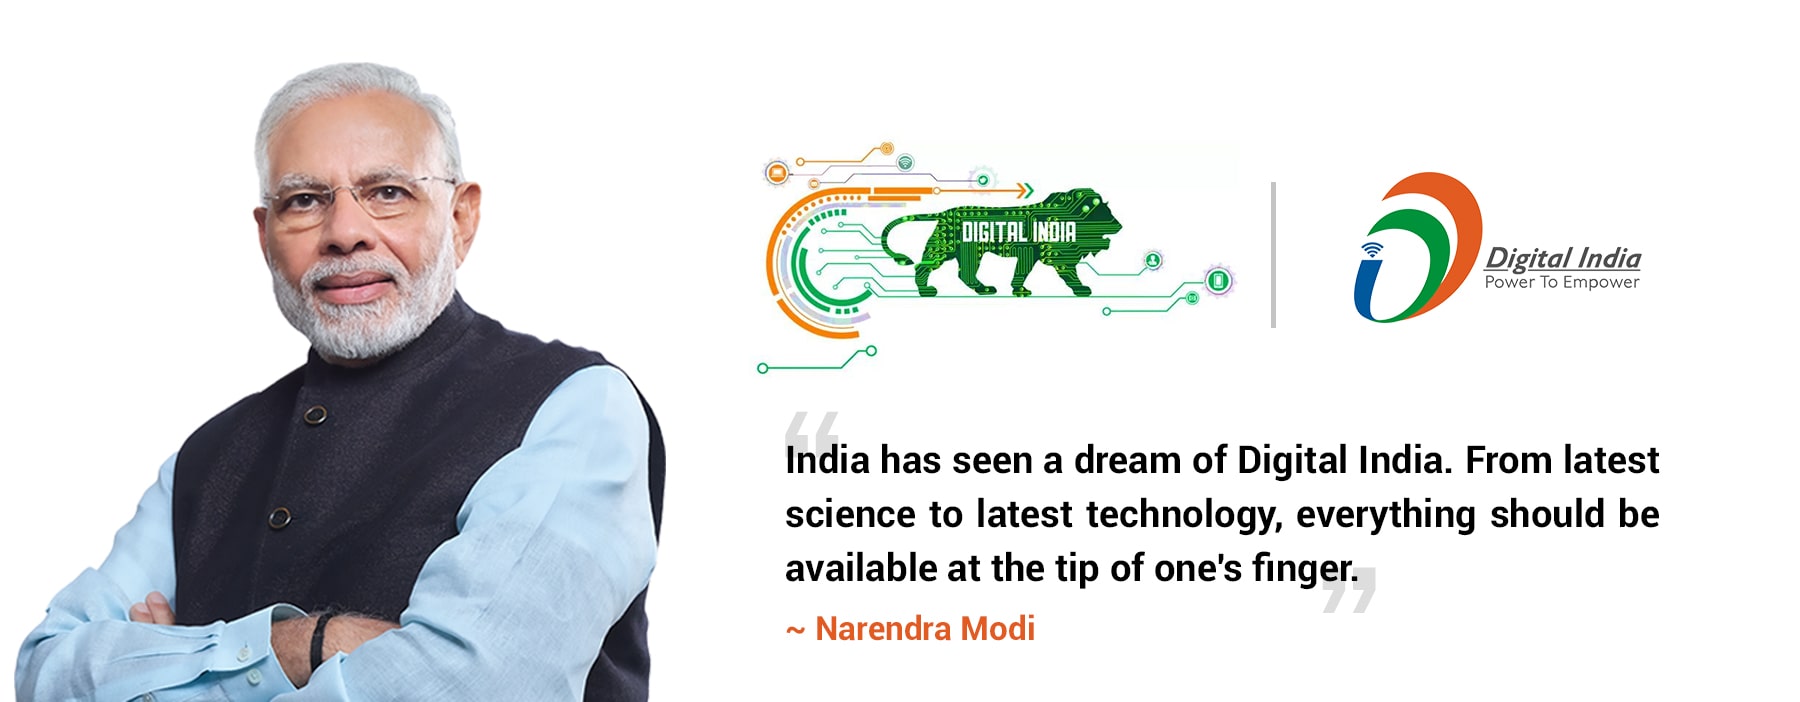 Digital India Initiative by government of india to promote digital literacy and bringing digital inclusion.